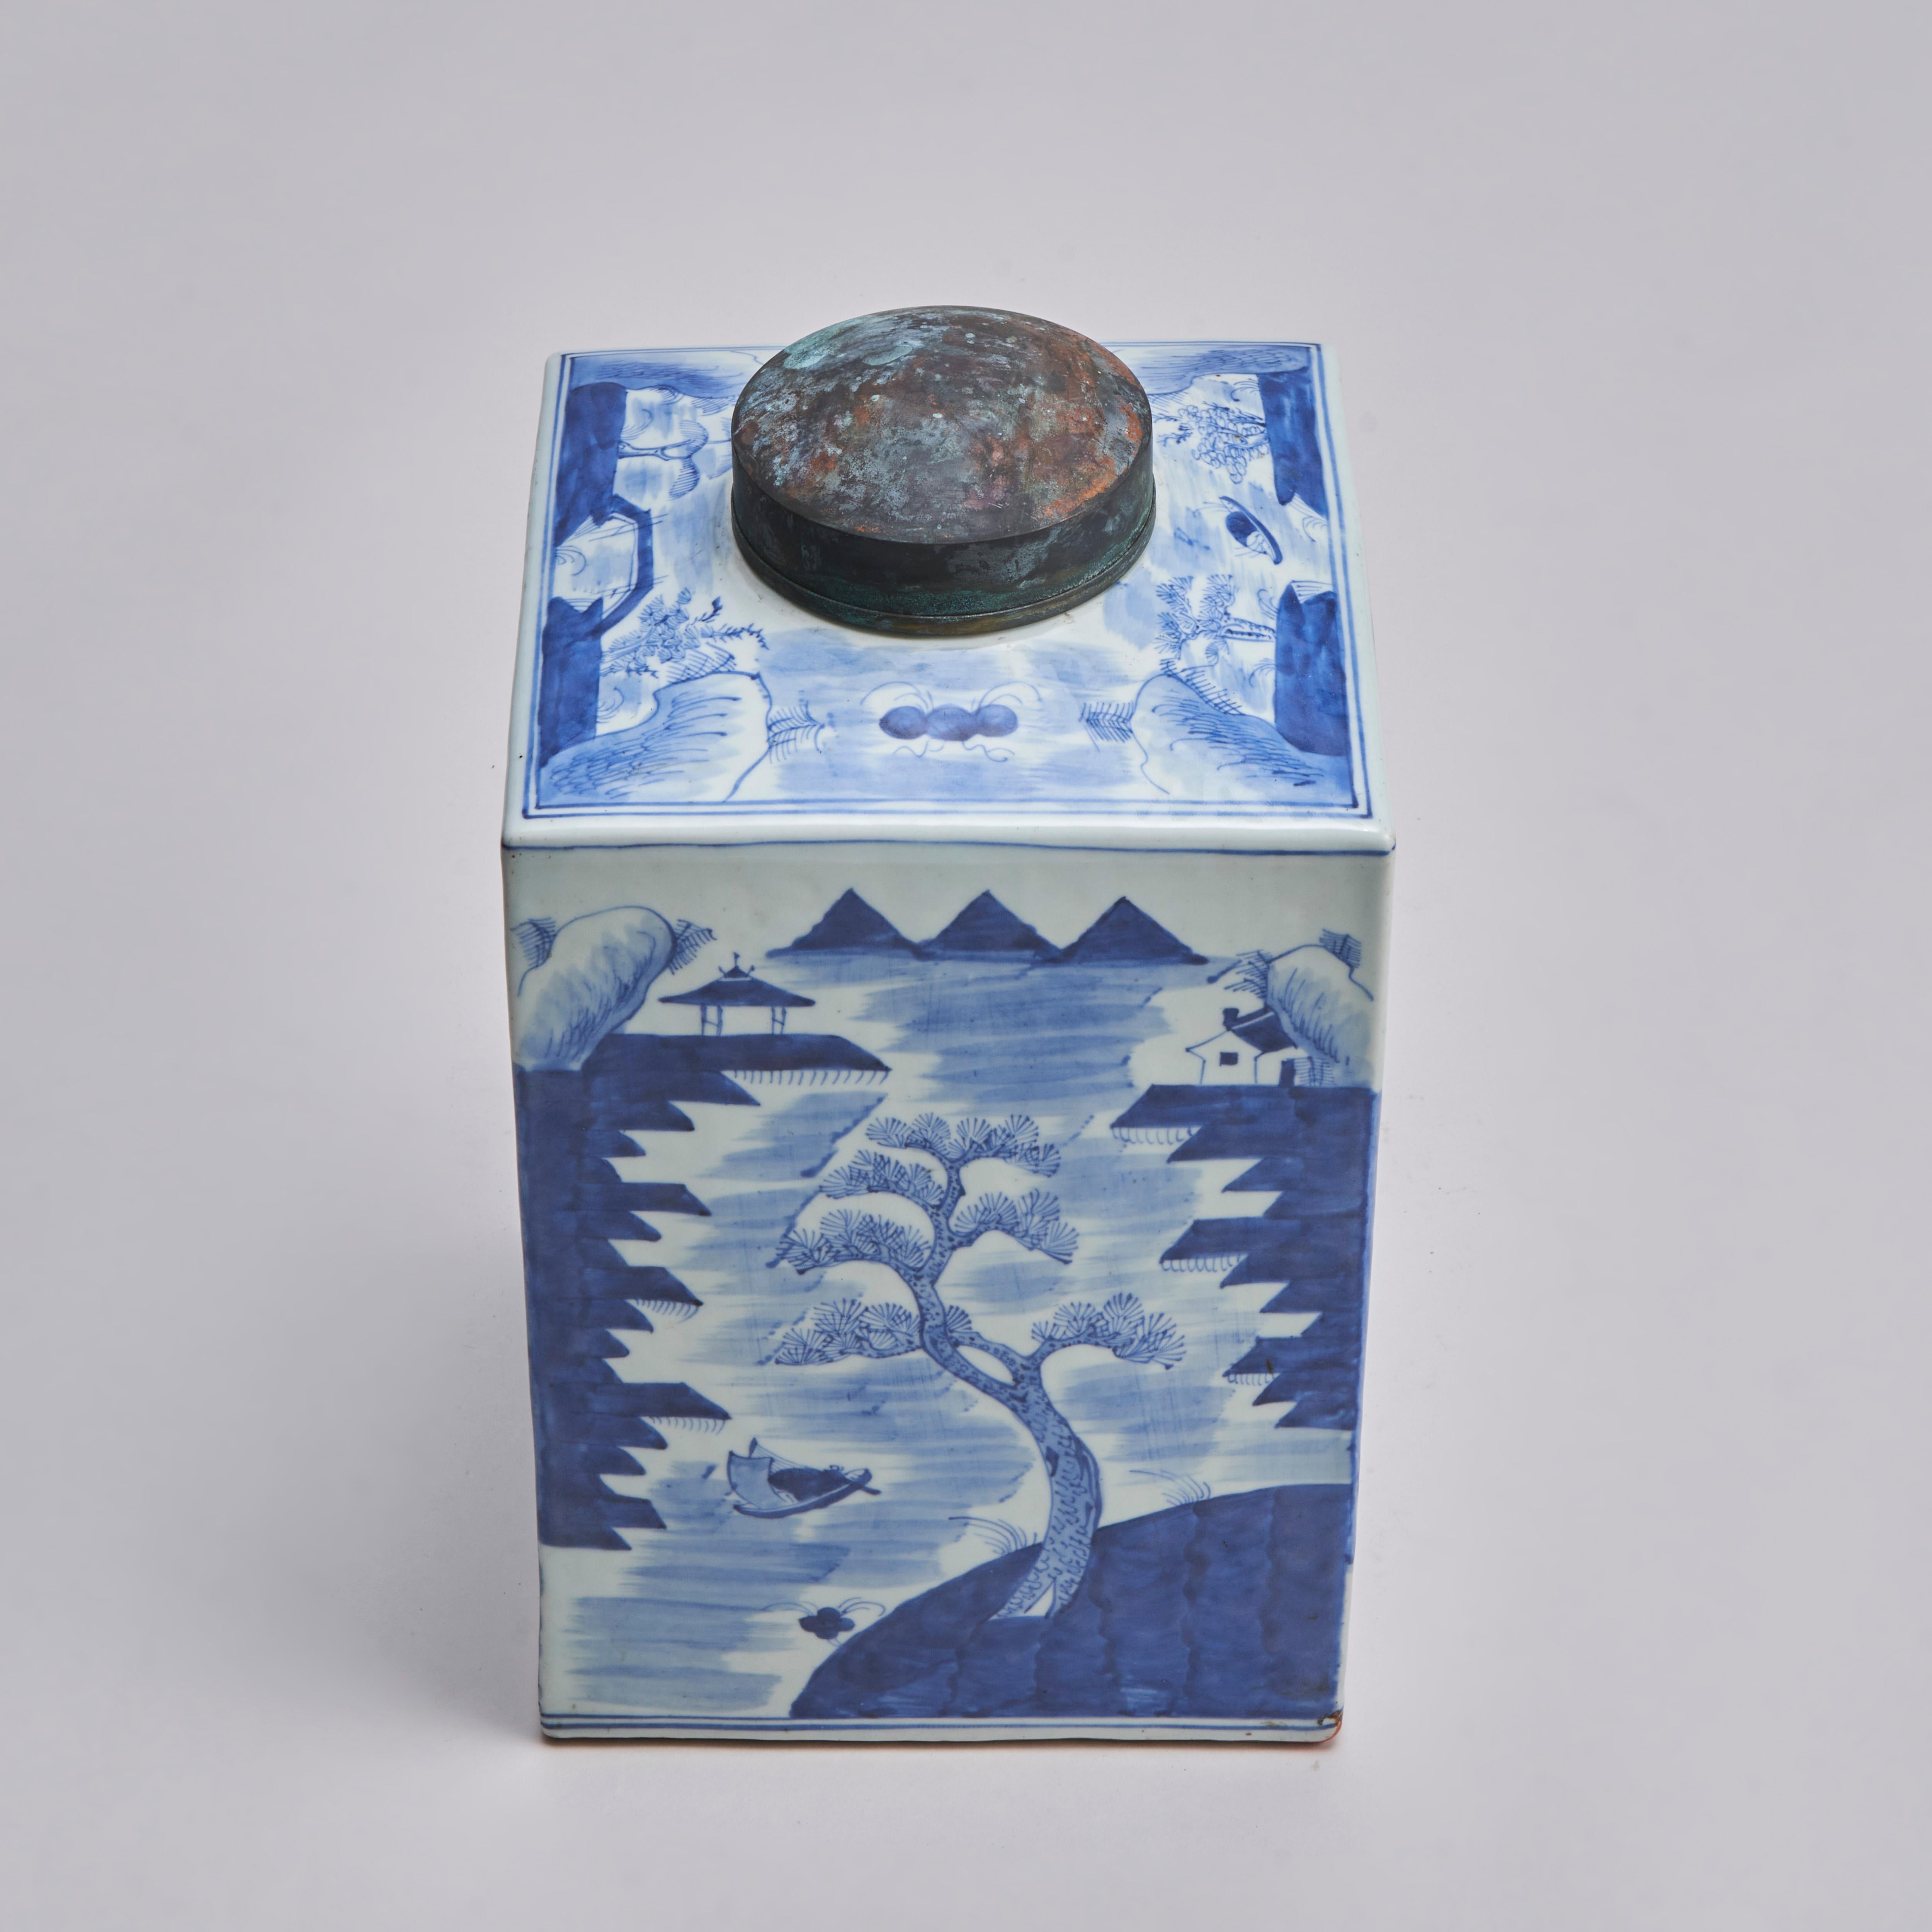 From our collection of antique Oriental ceramics, an early 19th century Chinese blue and white tea jar with a metal lid, decorated with the classic tea jar landscape design.

Contact us for further information or to arrange a viewing.